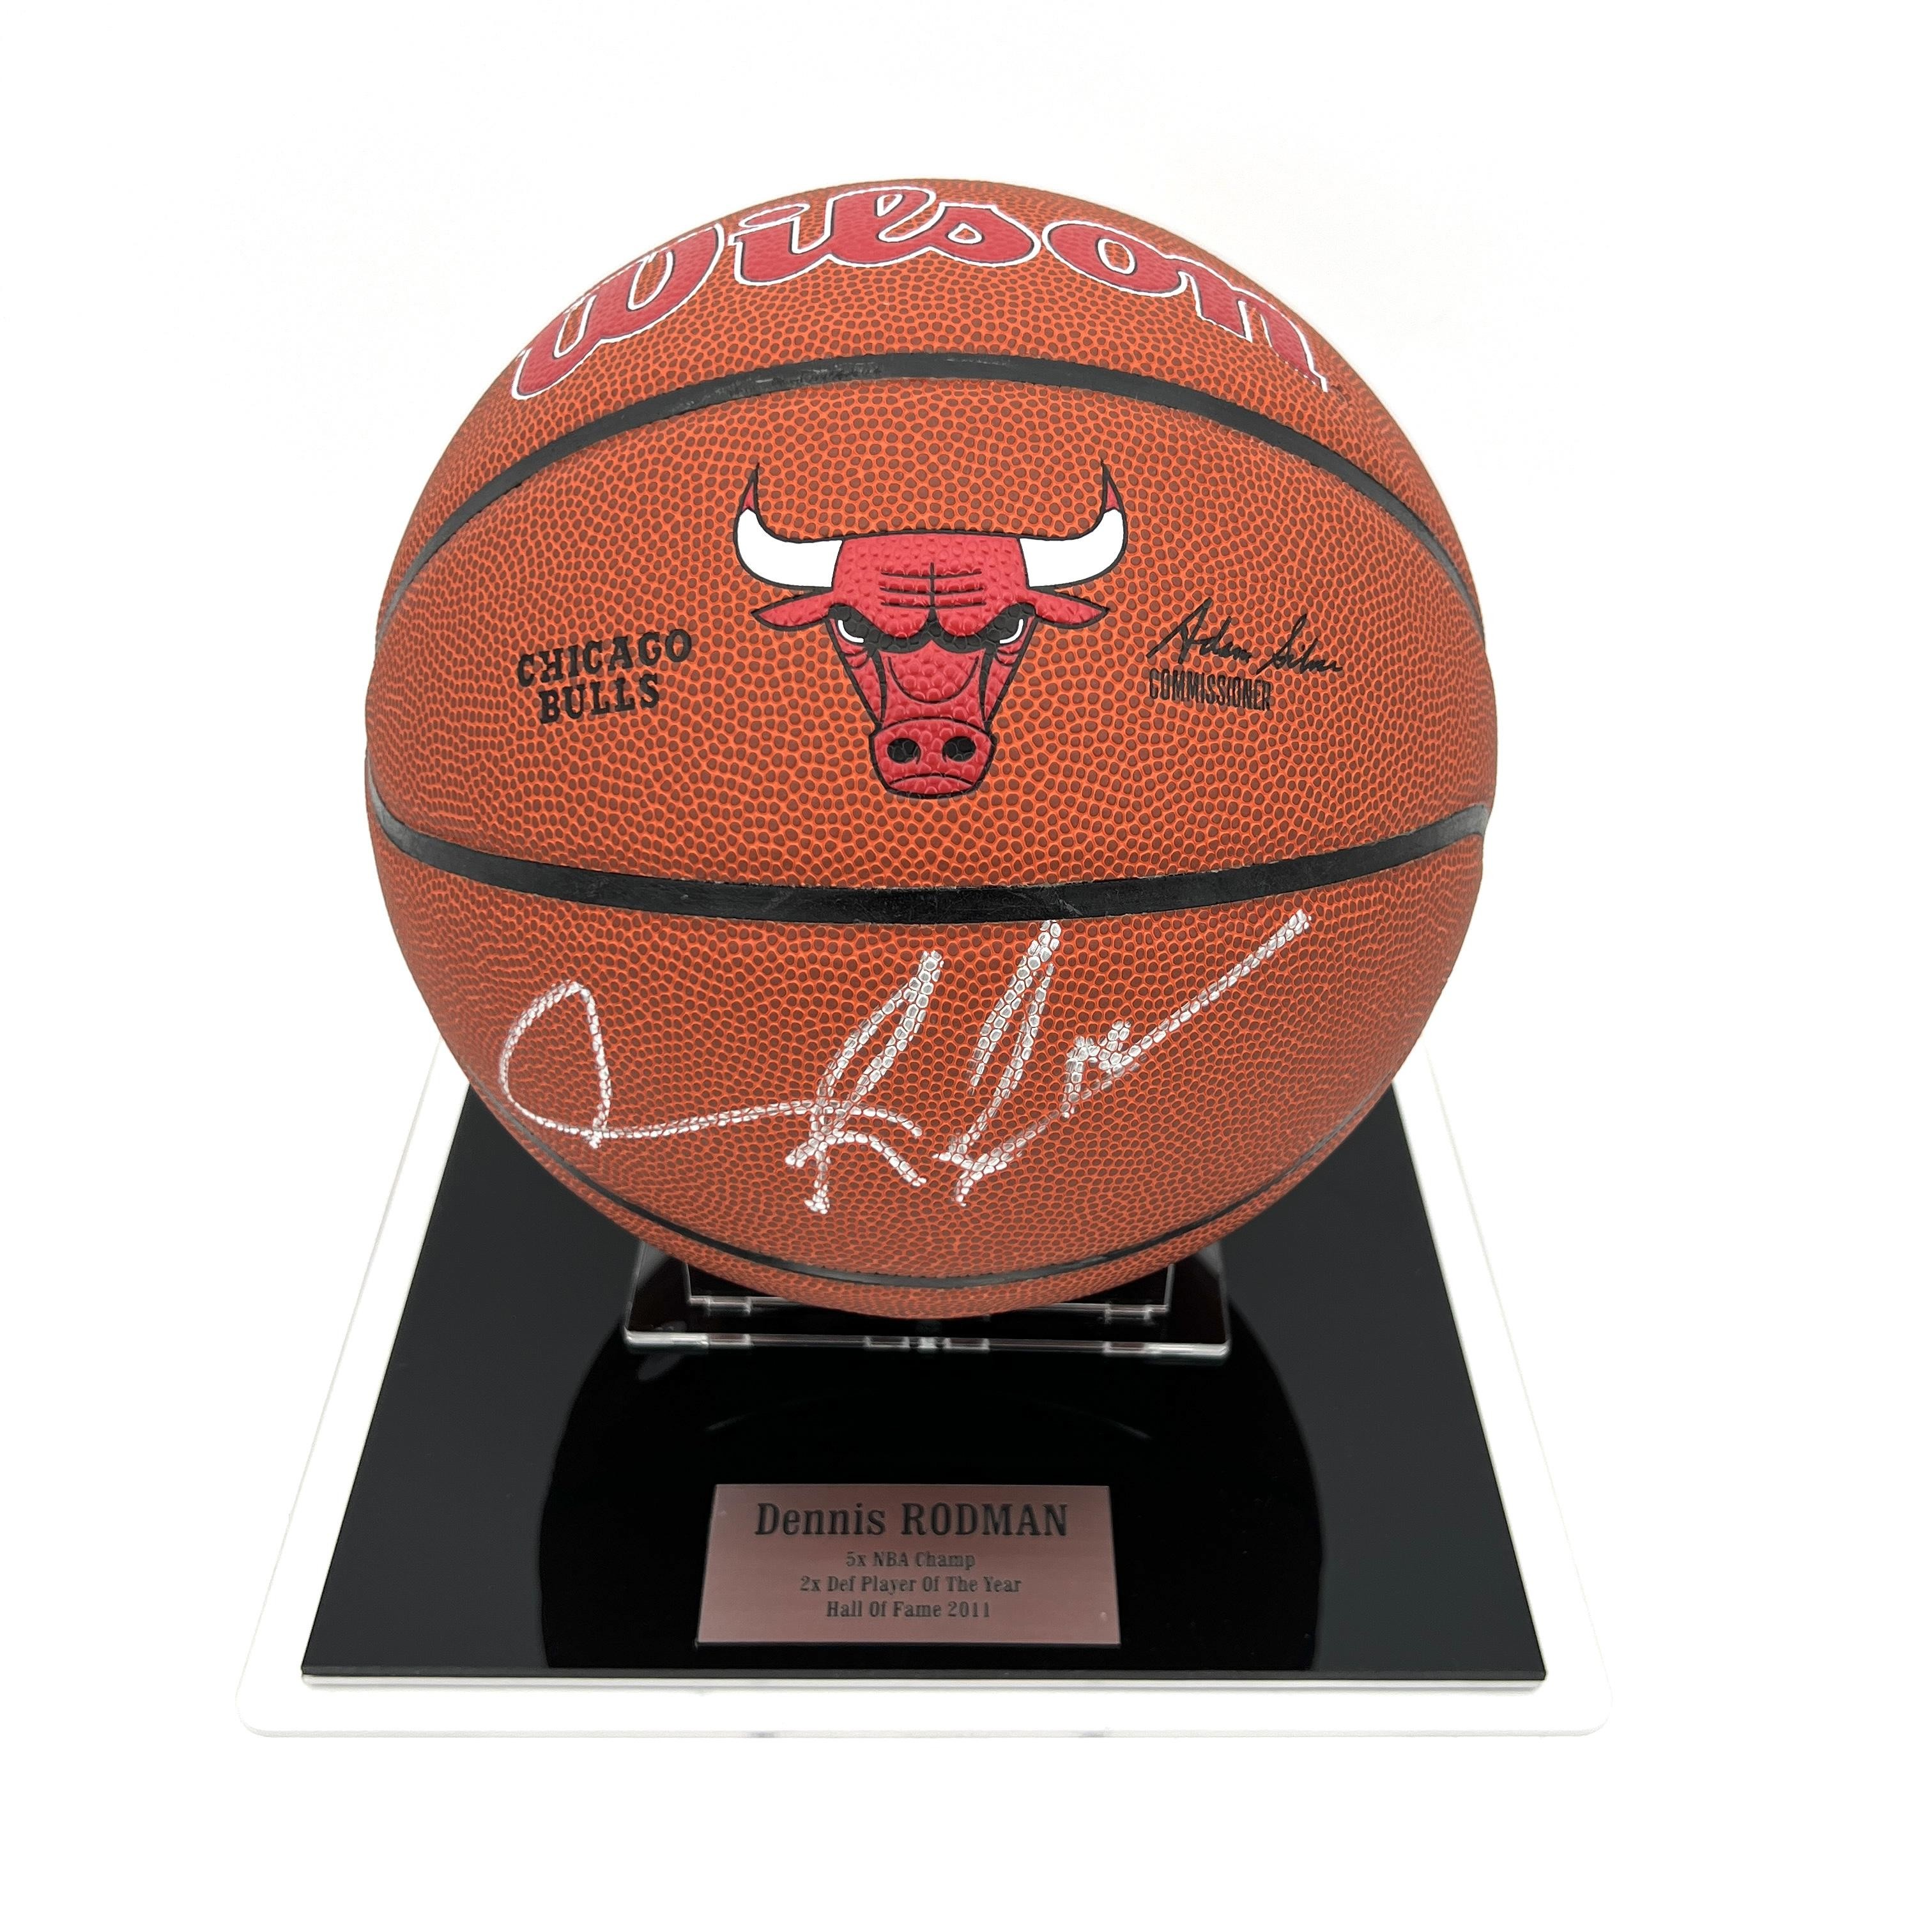 Limited Edition Dennis Rodman Signed Hall of Fame Basketball with